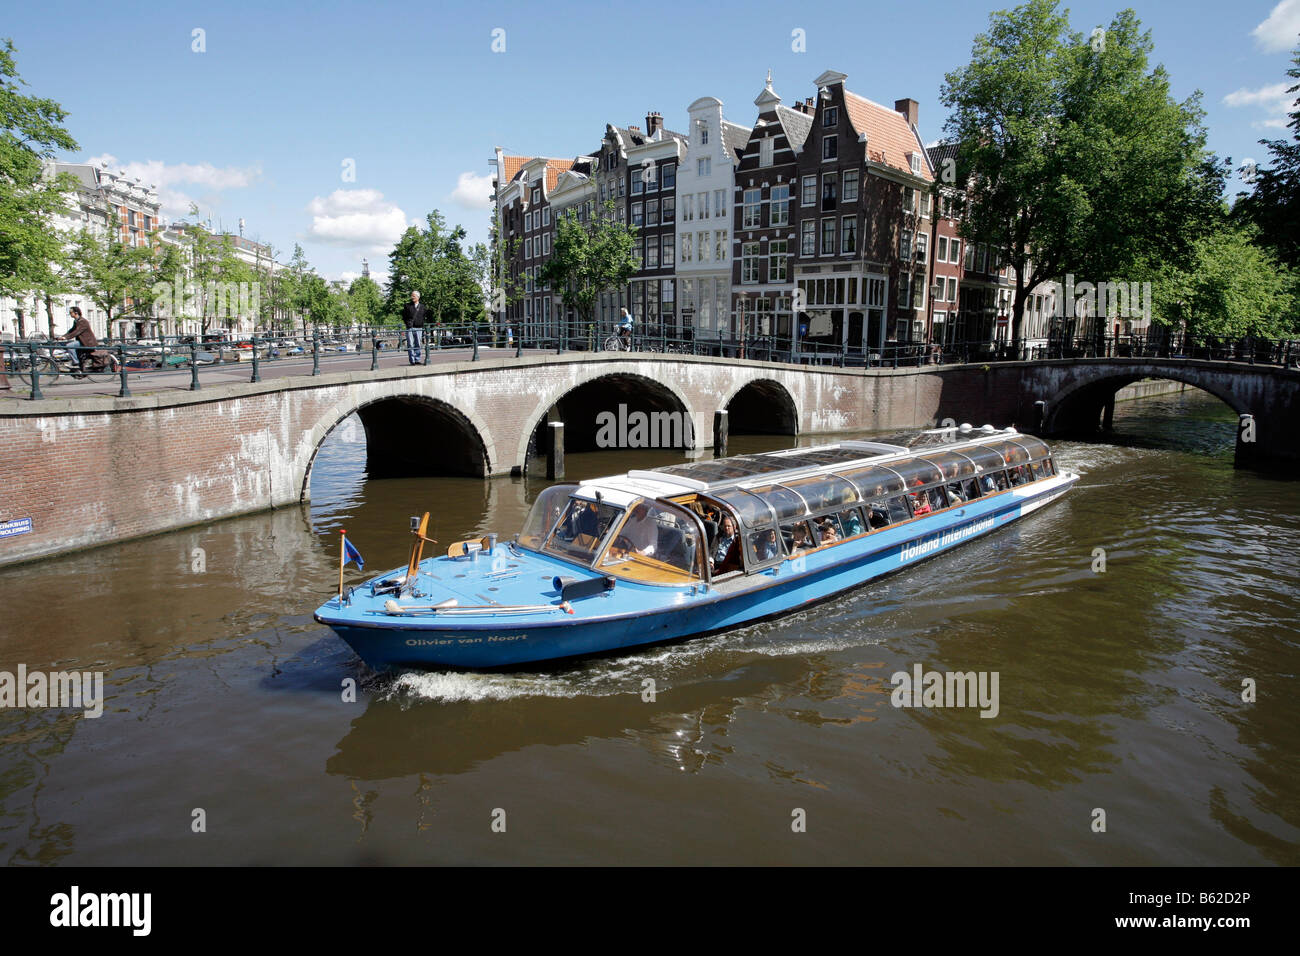 Tourist sightseeing boat on a grachtentour or canal tour, in front of canal houses, Leidse Ecke Prinsengracht, Amsterdam, Nethe Stock Photo